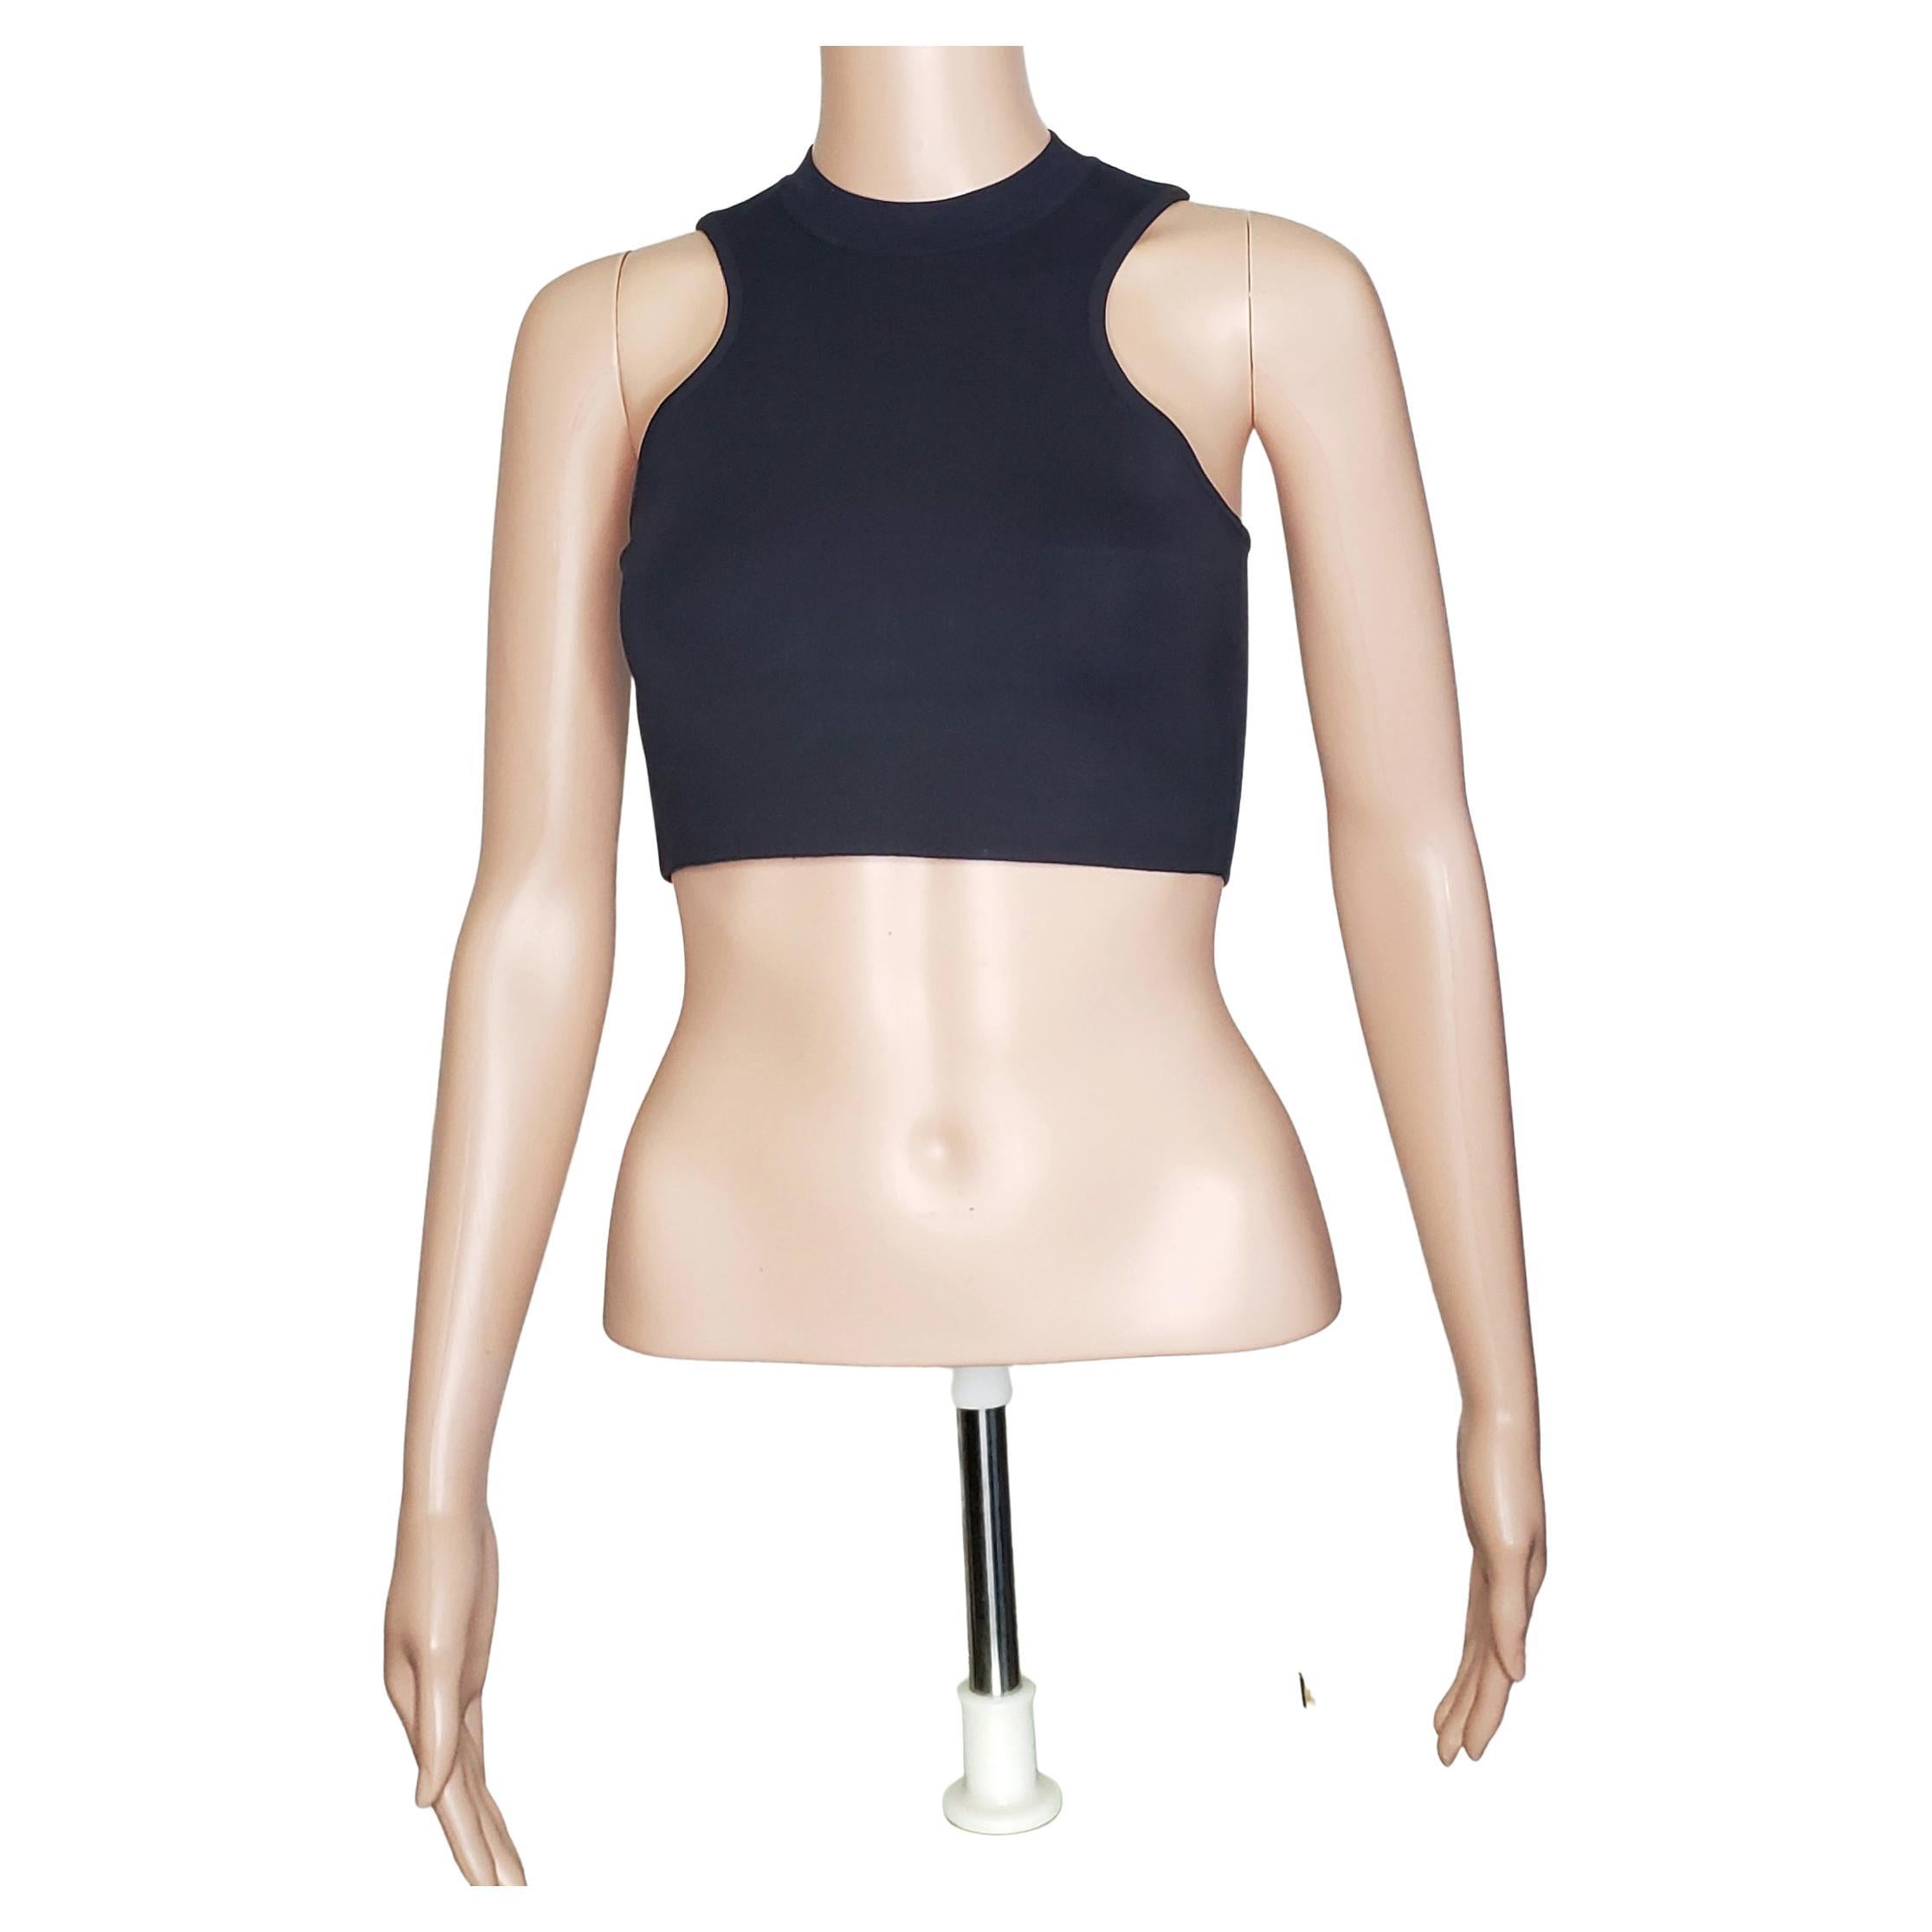 S/S 2015 Look # 1 VERSACE BLACK SILK KNITTED STRETCHY CROP TOP 38 - 2 For Sale